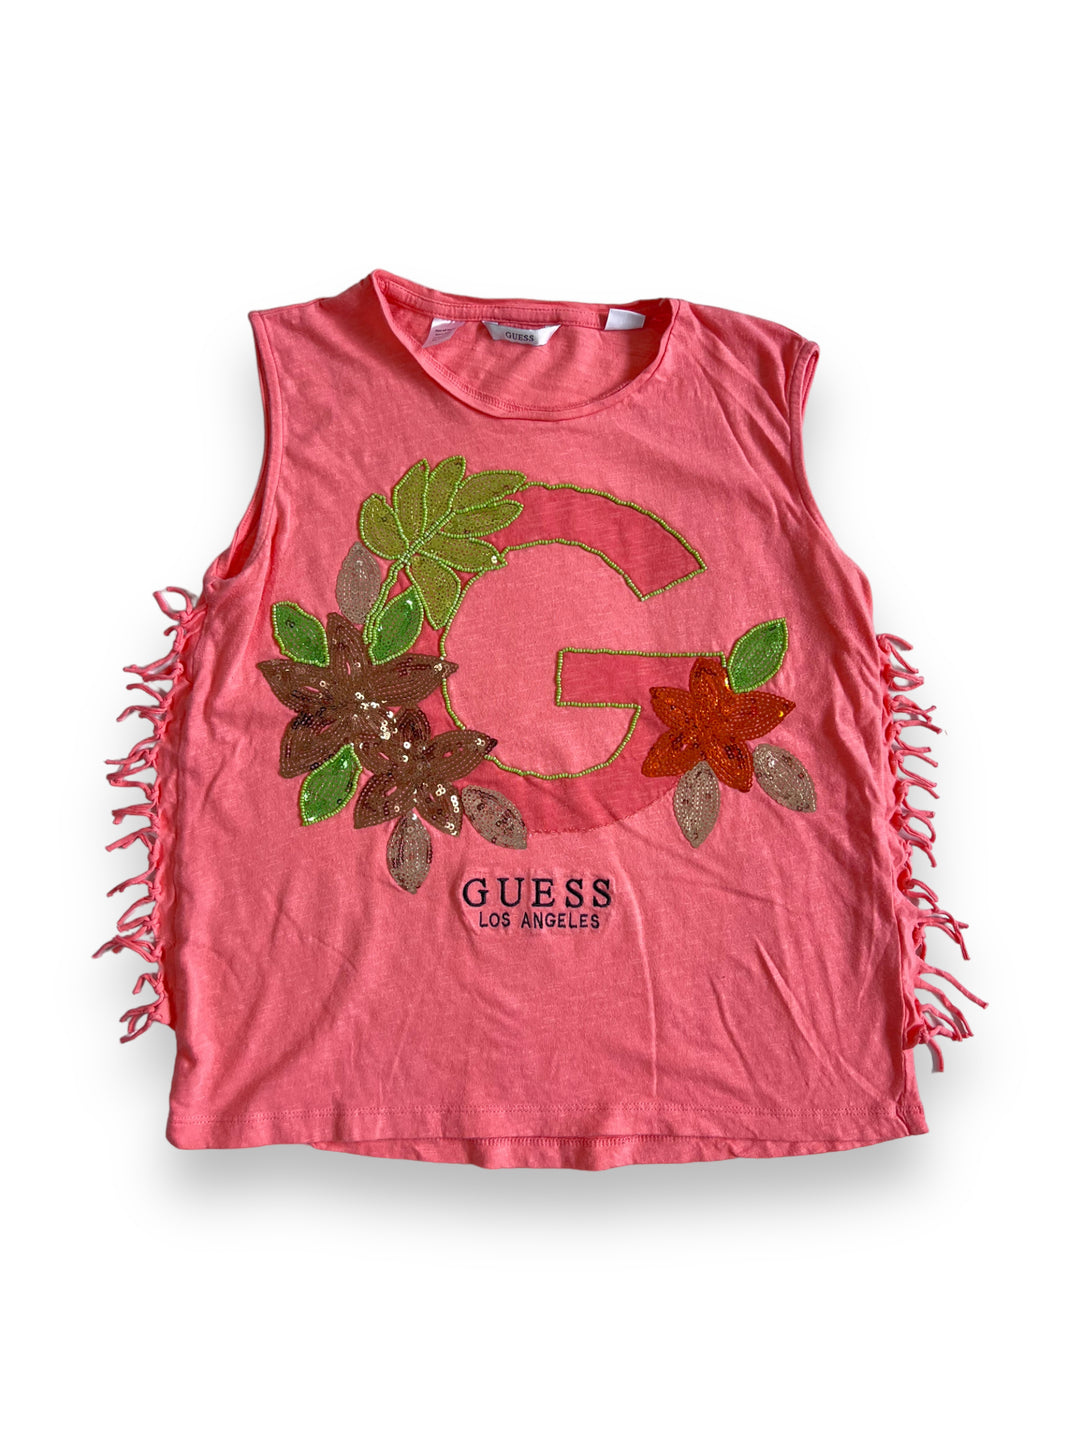 Guess Vest Top Women’s Extra Small